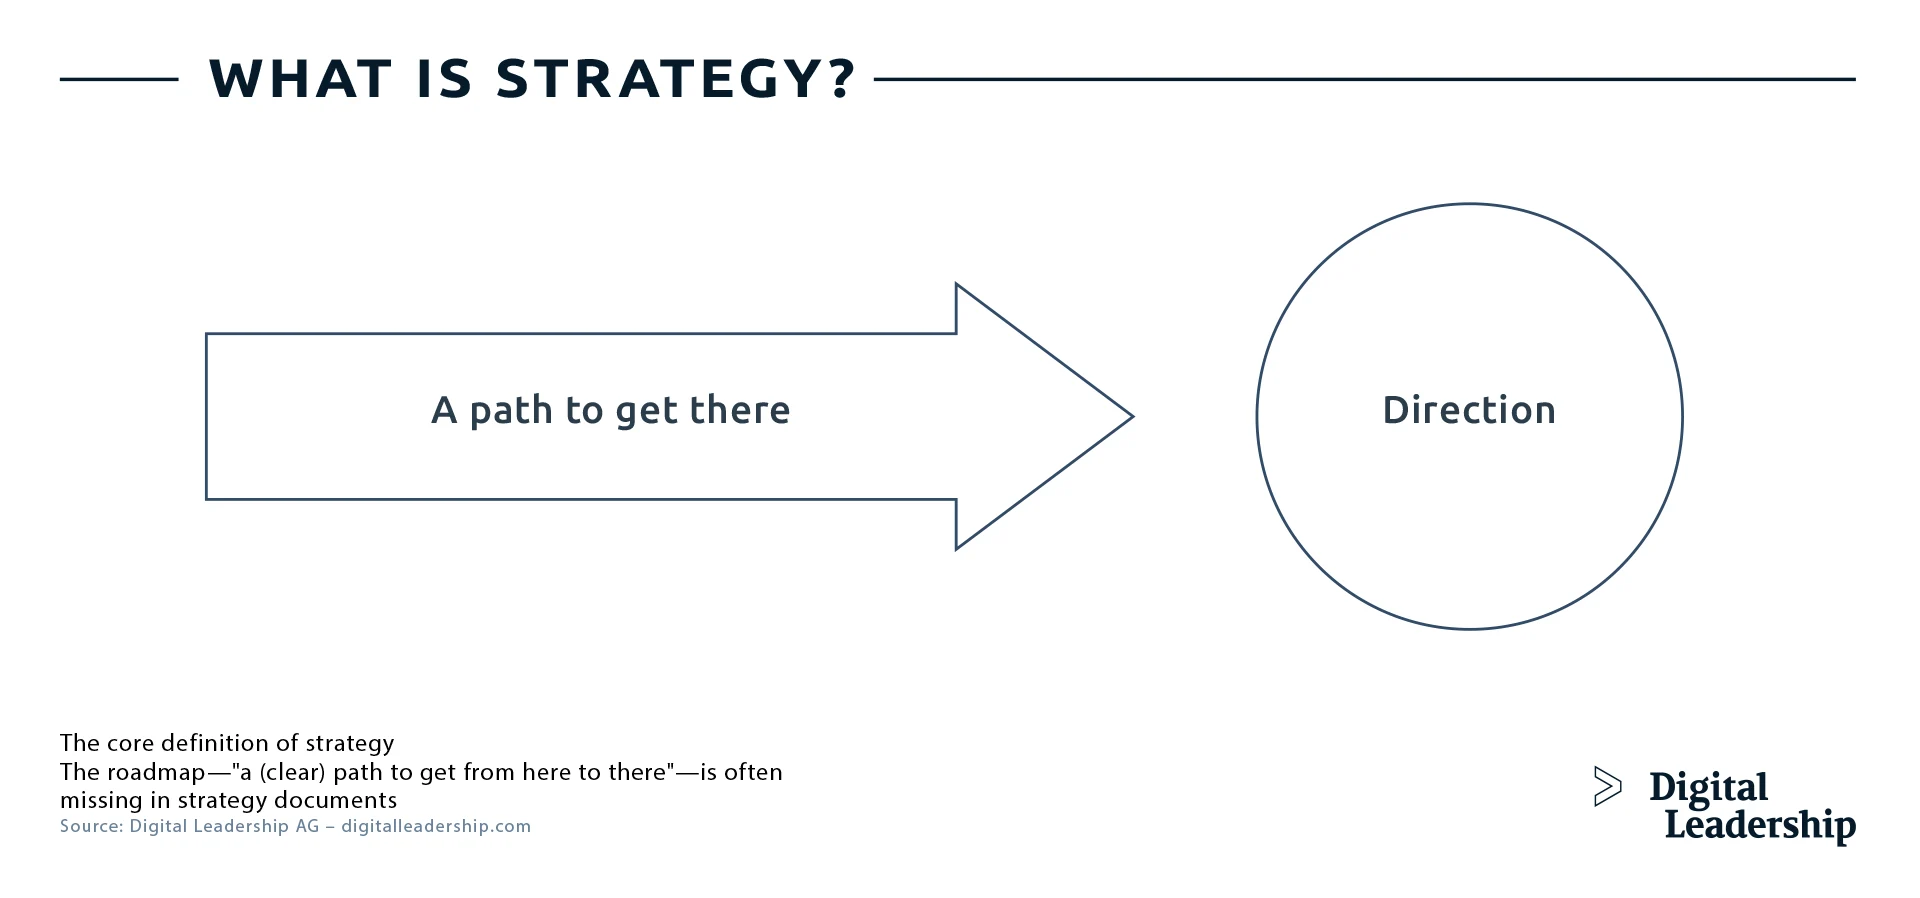 What is Strategy?